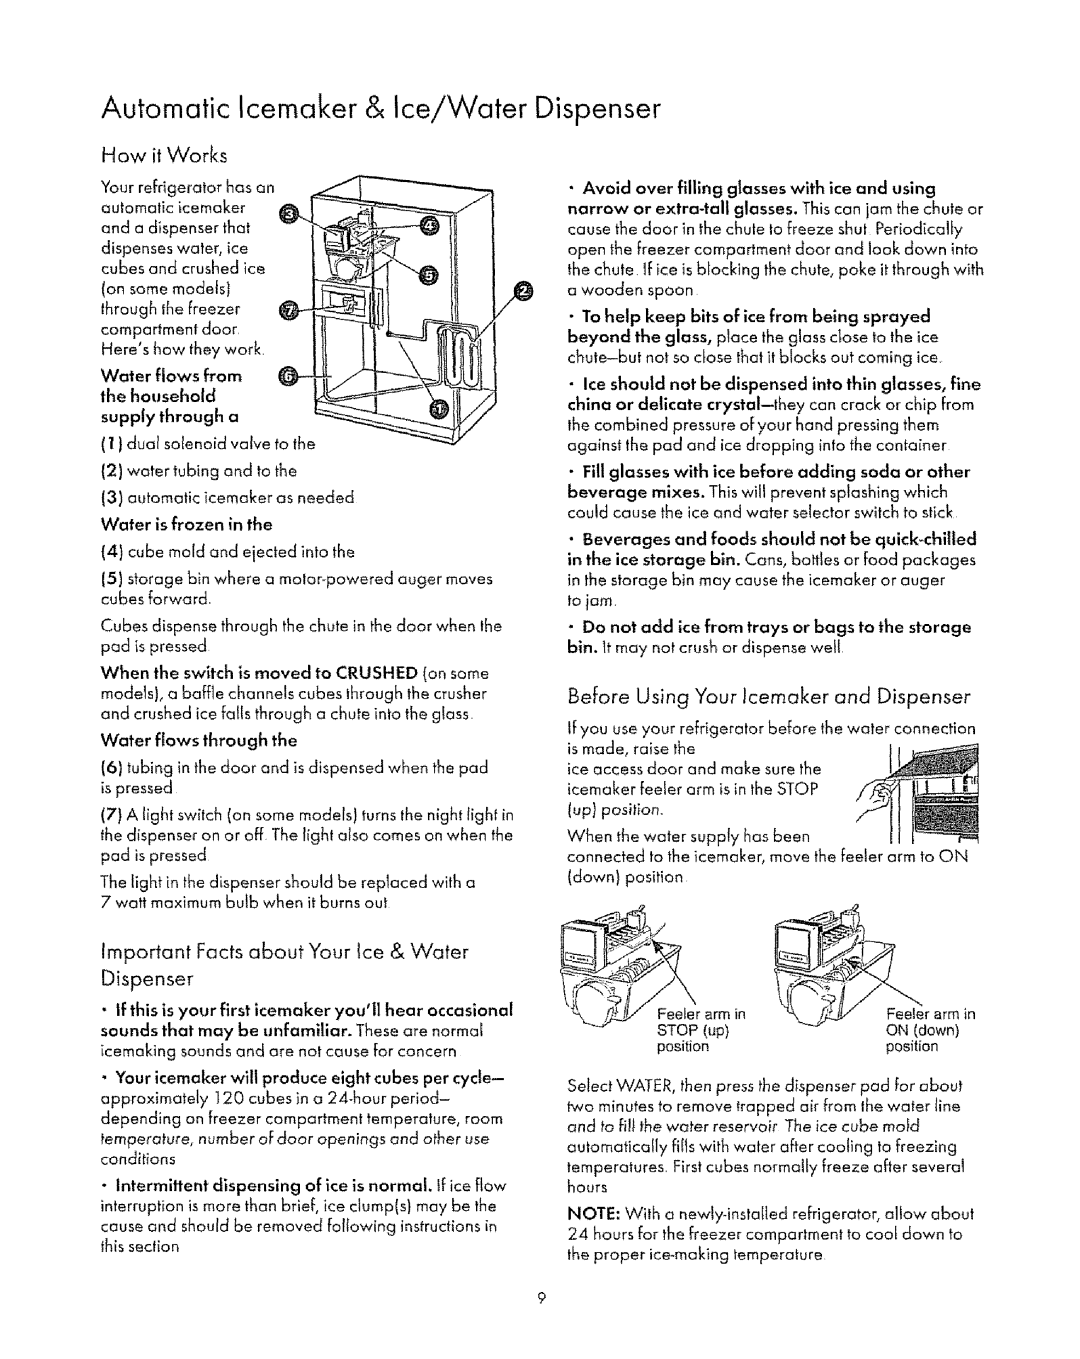 Sears 53071, 53078 Automatic Icemaker & Ice/Water Dispenser, How it Works, Before Using Your Icemaker and Dispenser, erin 